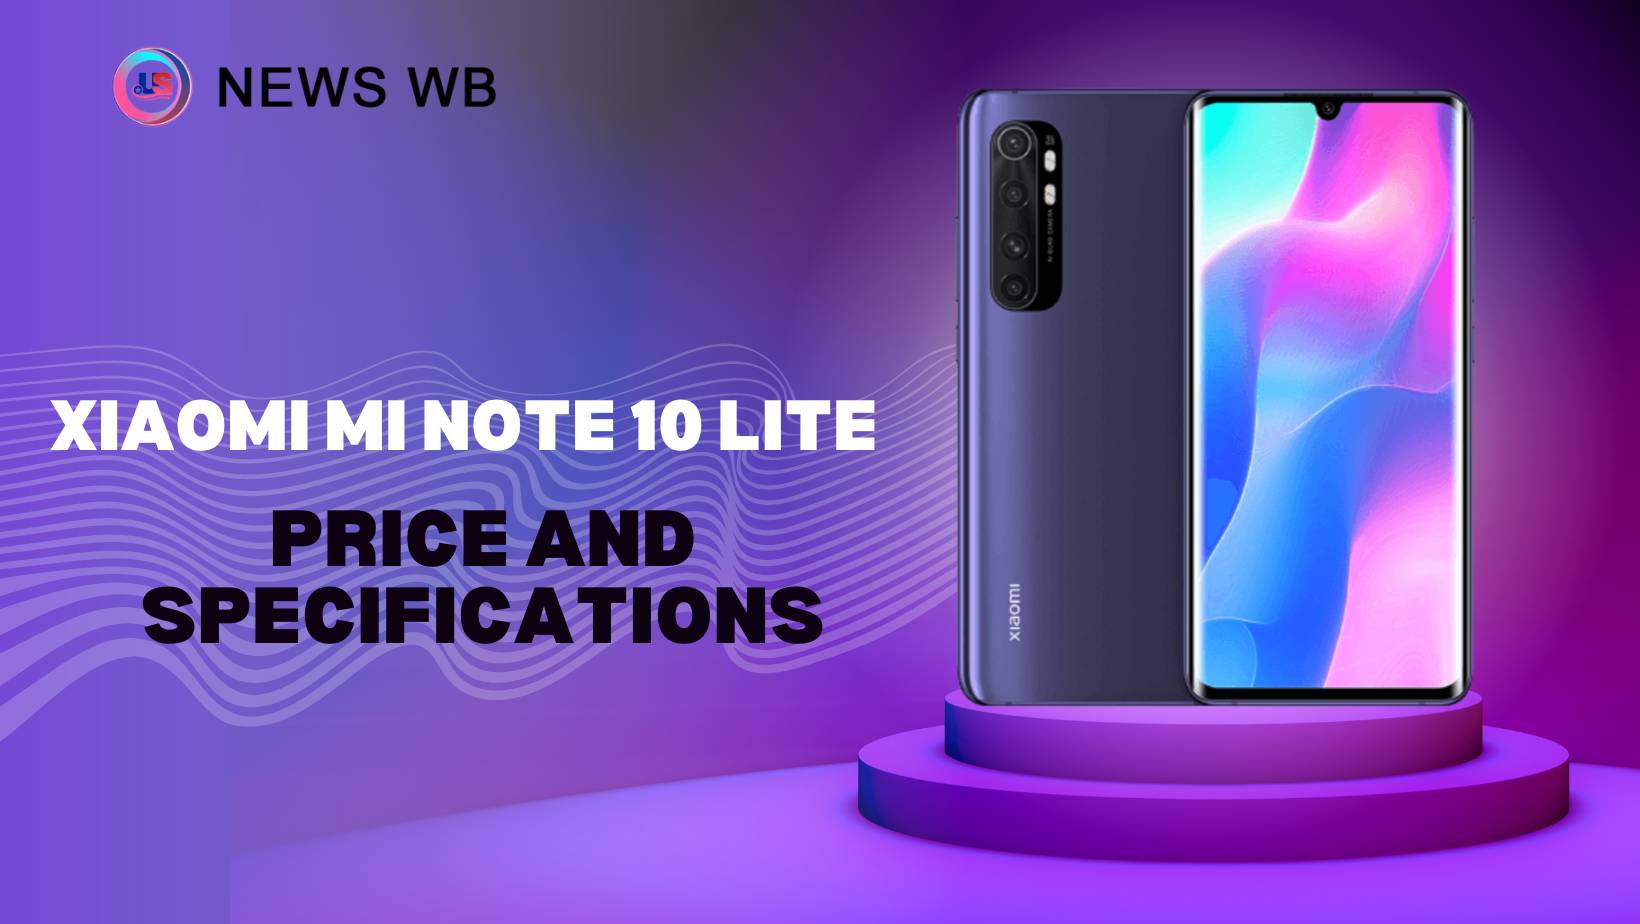 Xiaomi Mi Note 10 Lite Price and Specifications